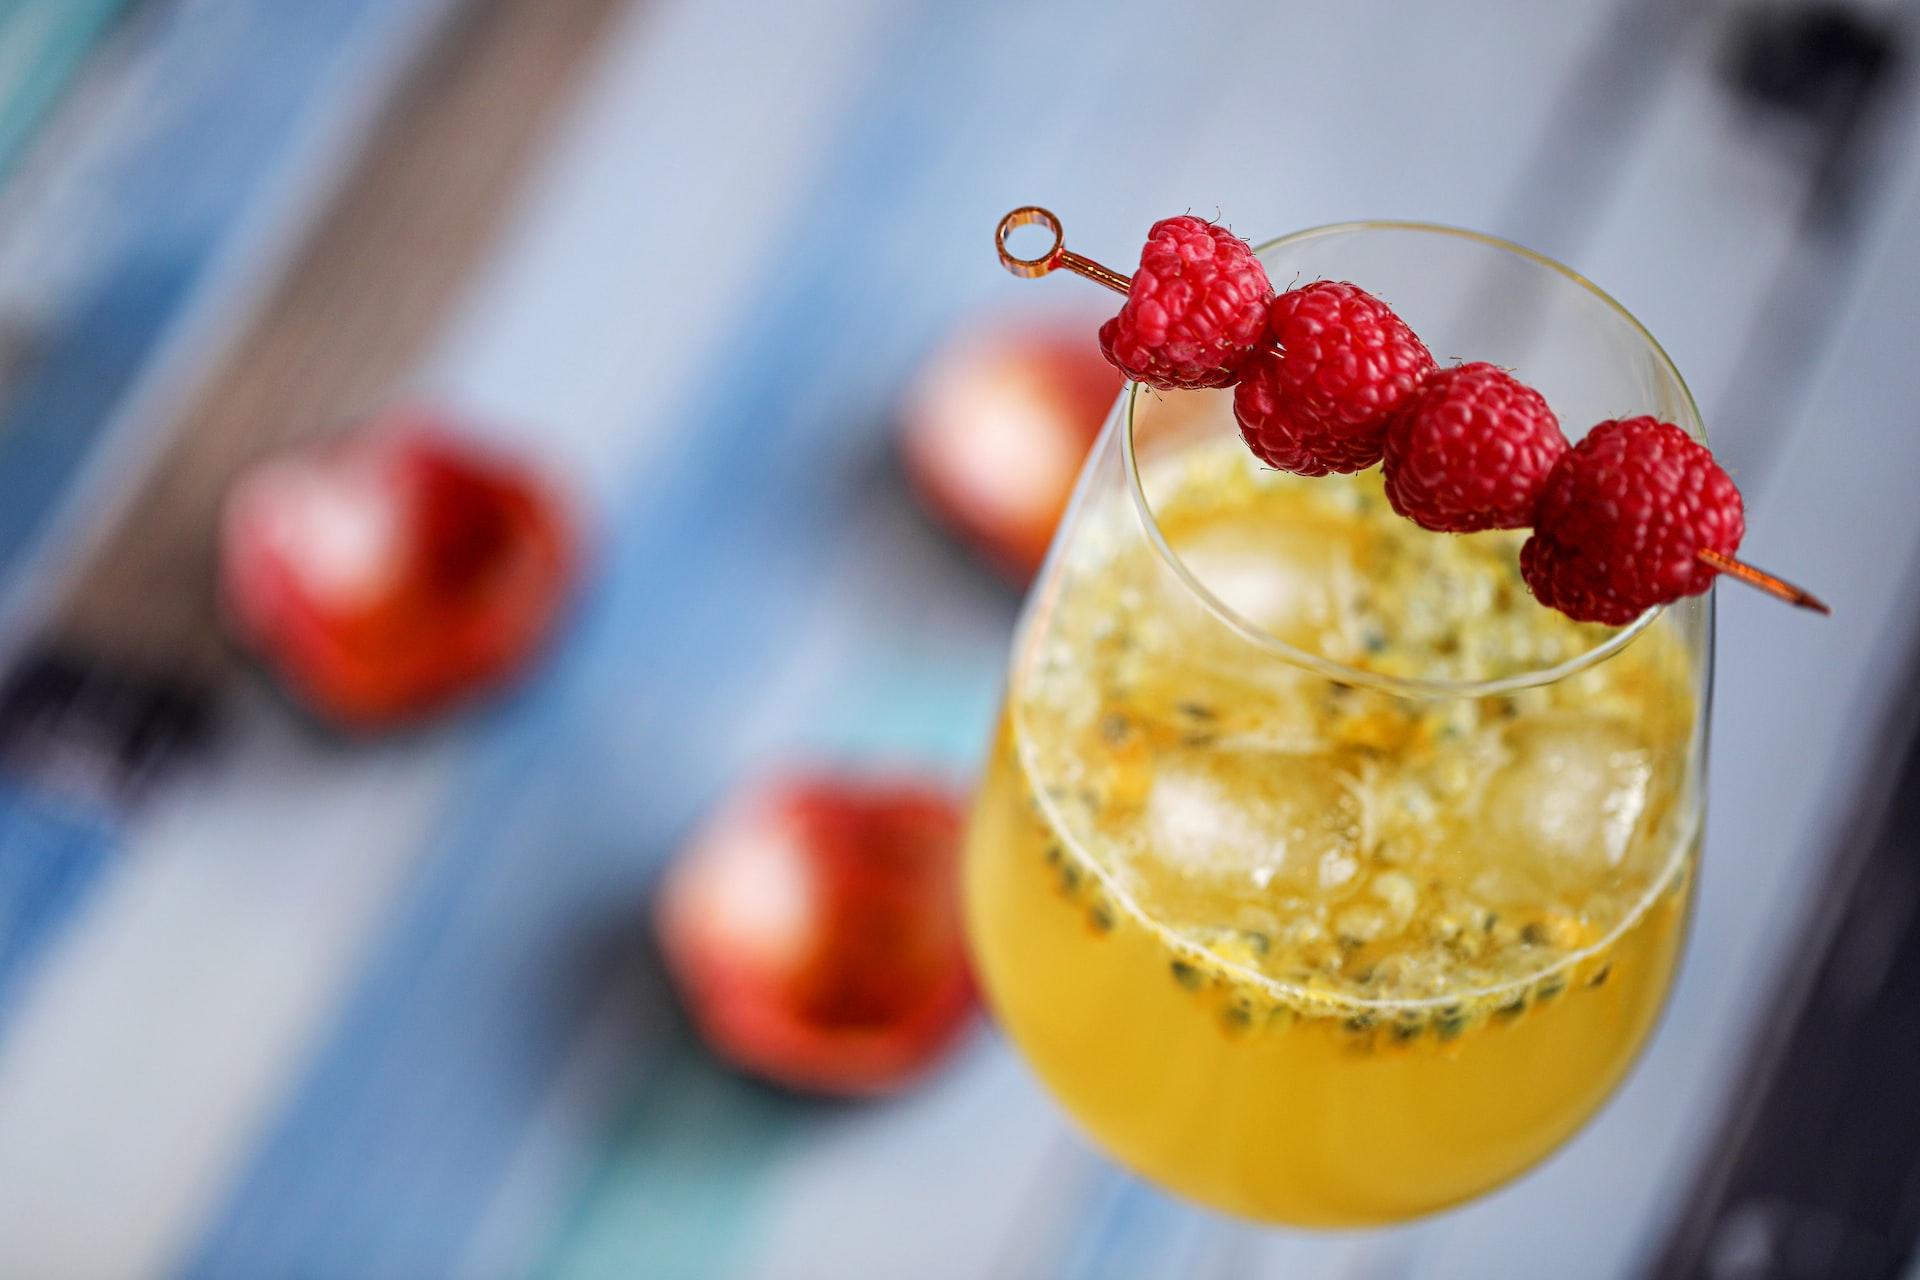 a glass of yellow liquid with red berries on top